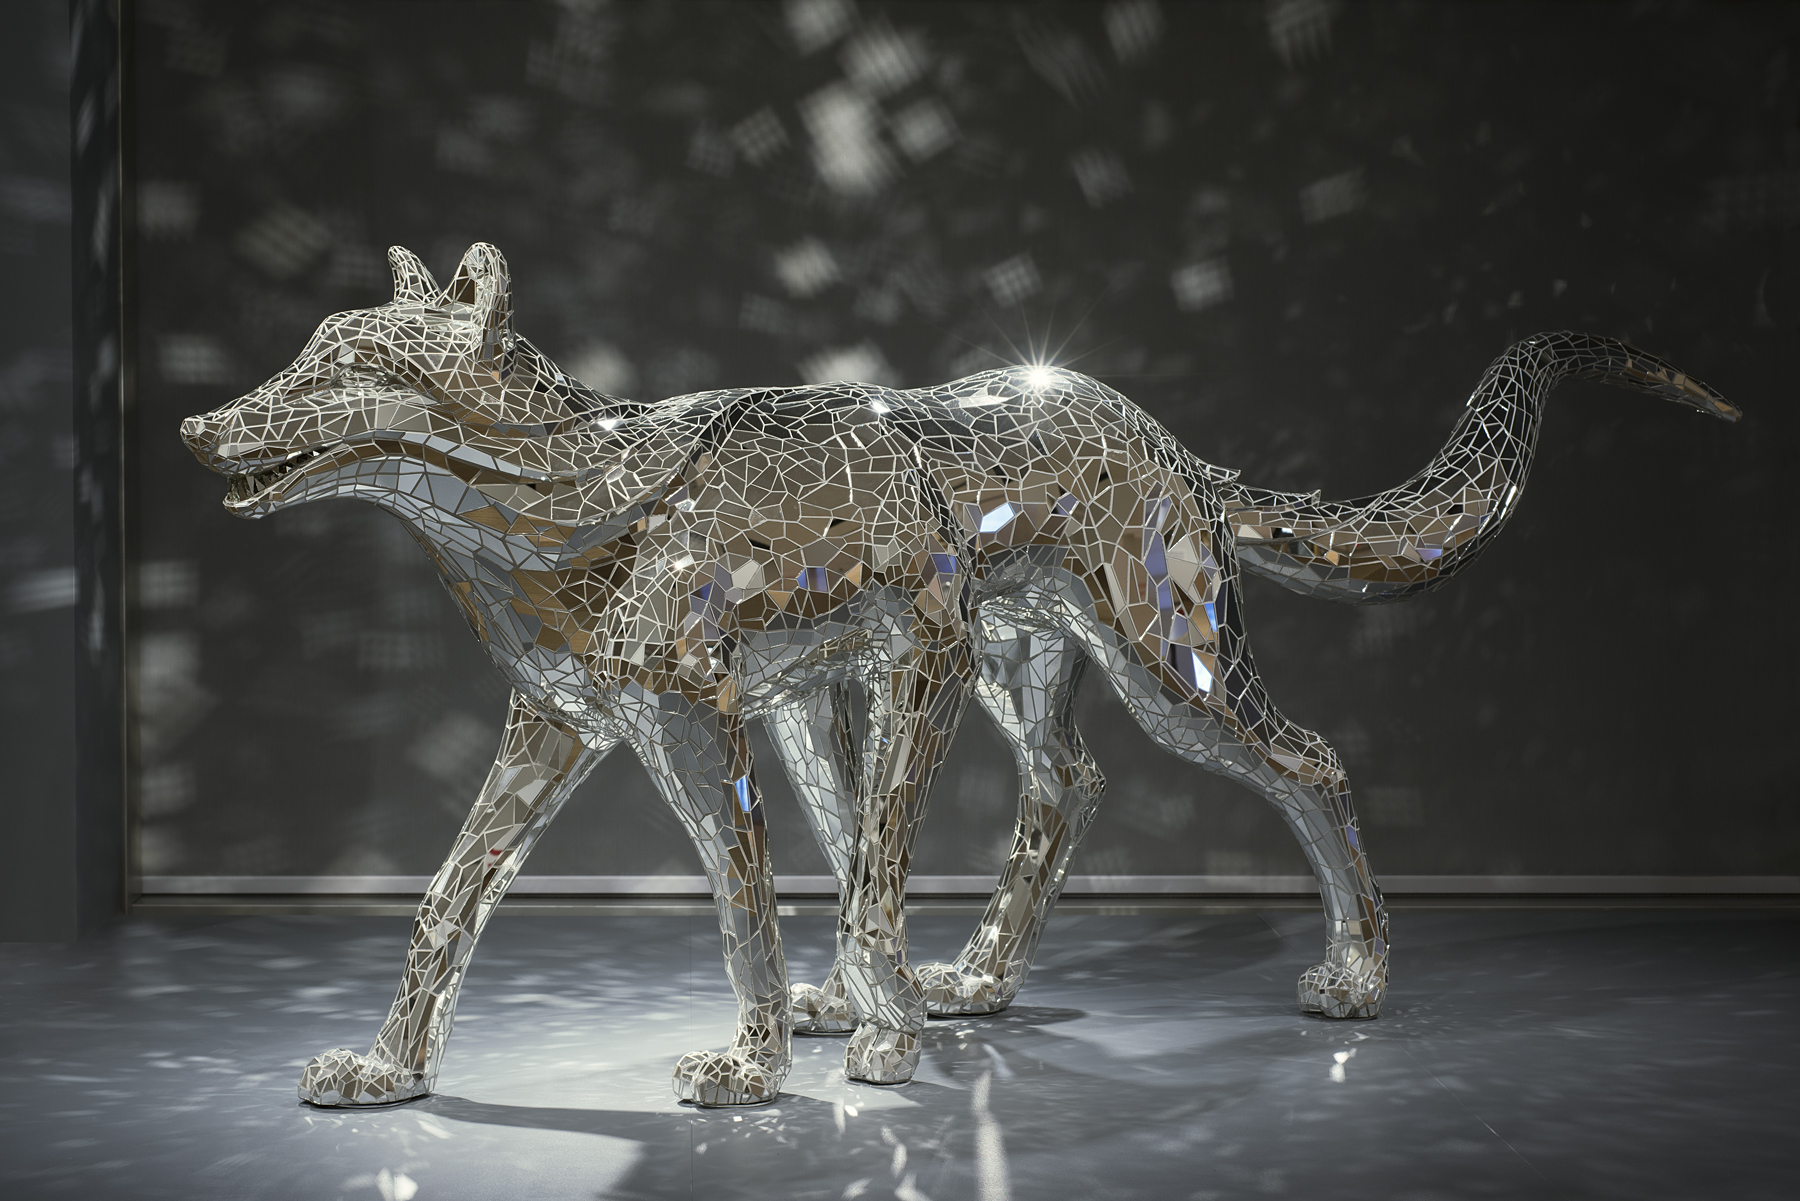 A six-legged wolf covered in a mosaic of sparkling mirrors walks with its tail raised and mouth slightly open